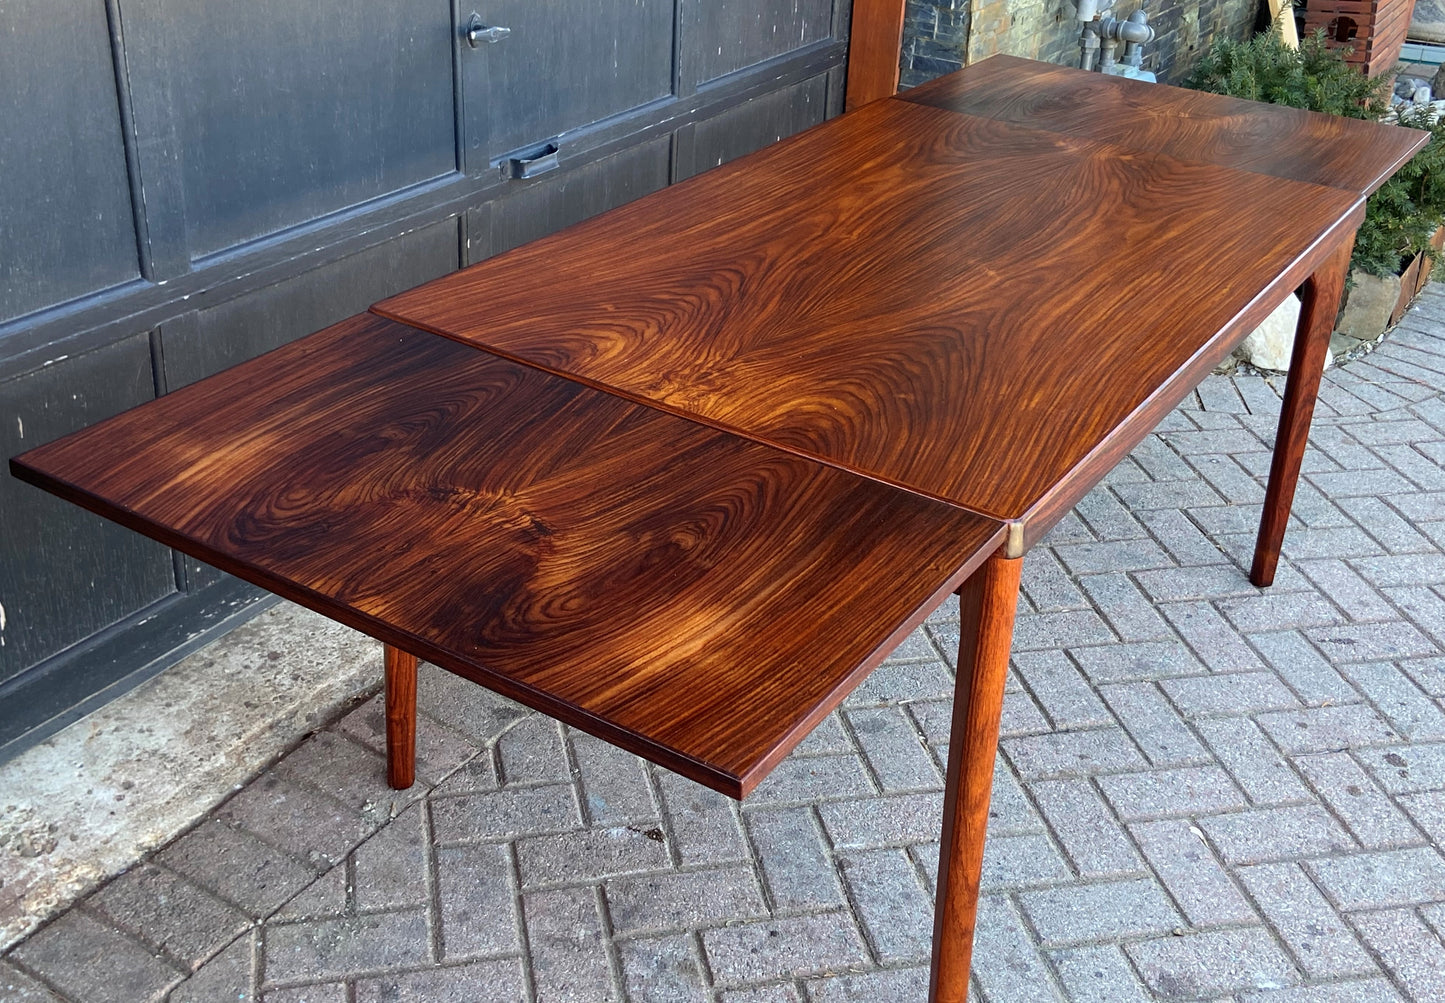 REFINISHED Danish MCM Rosewood Draw Leaf Table by H. Kjaernulf  55.5" - 94.5" PERFECT